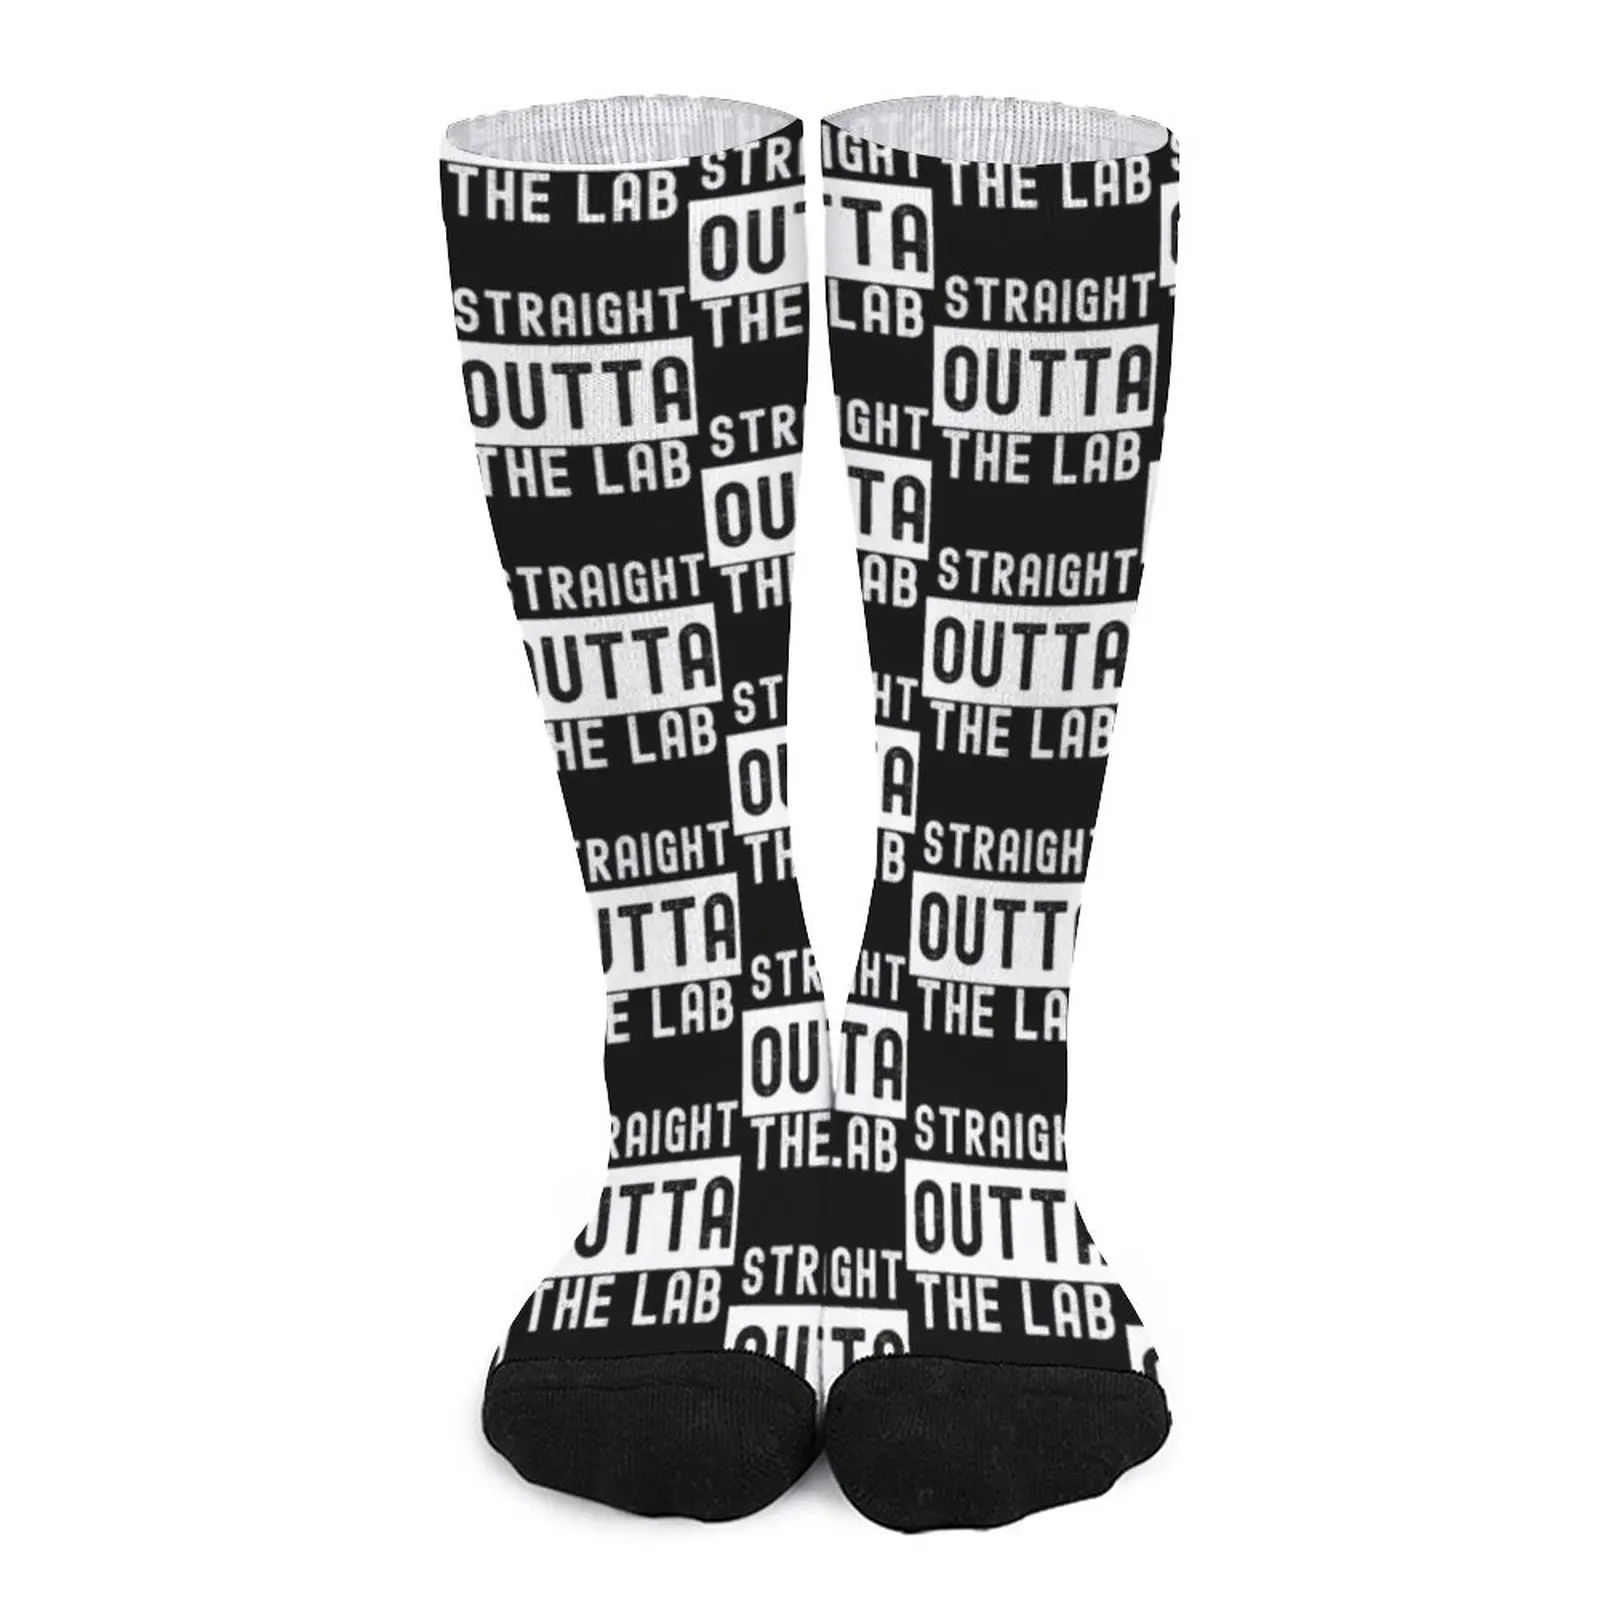 STRAIGHT OUTTA THE LAB LABLIFE Medical Laboratory Scientist FUNNY Socks Sports socks sports socks men cool socks Men gift elmsk men s summer new shorts youth fashion trend casual middle pants personalized splice contrast color straight leg sports